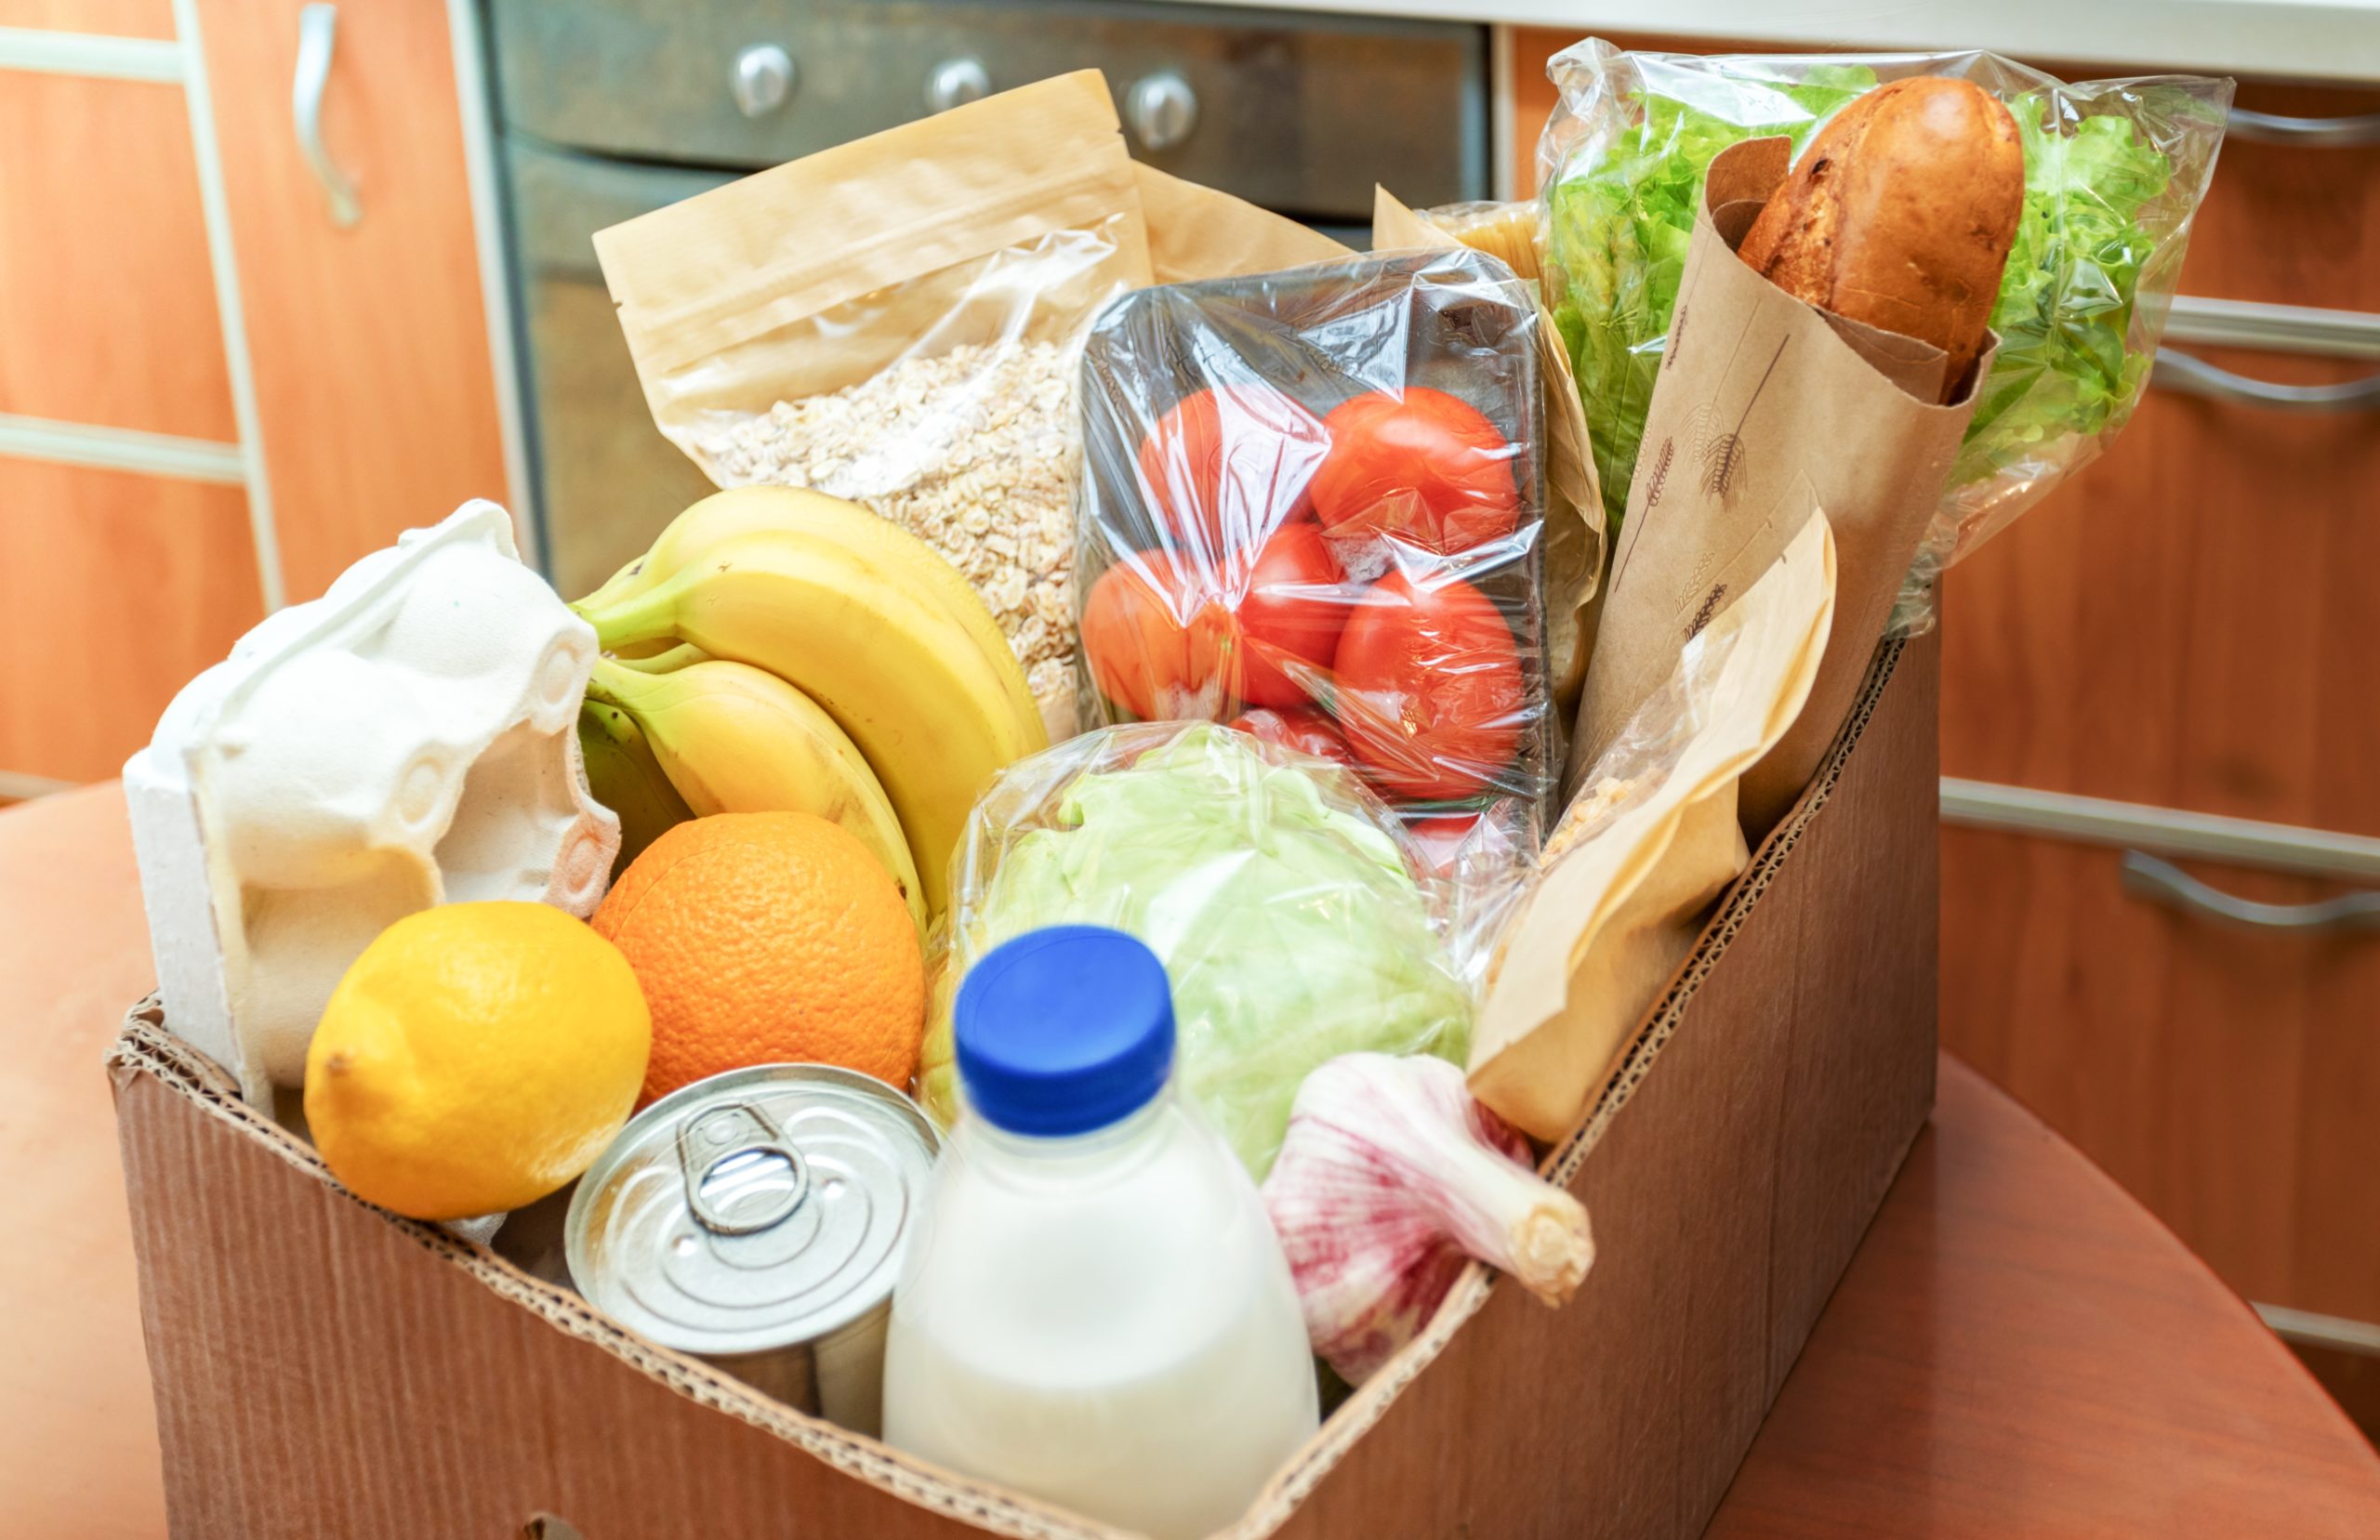 What to Do With Your Food When Moving: Don’t Waste Food